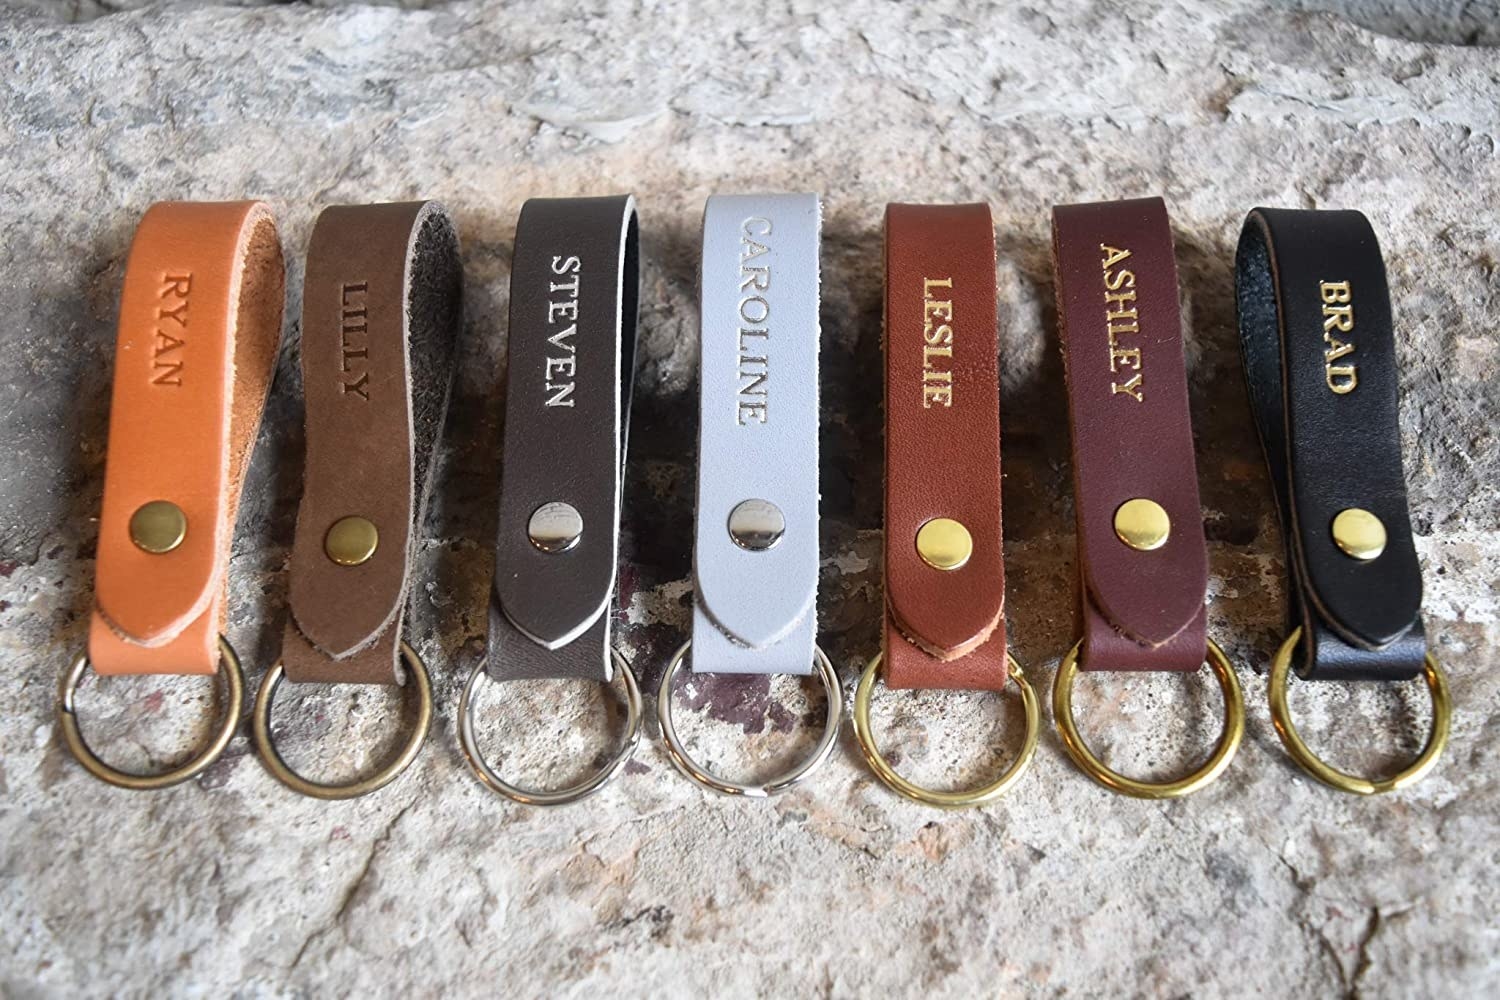 Seven leather keychains with various name engravings